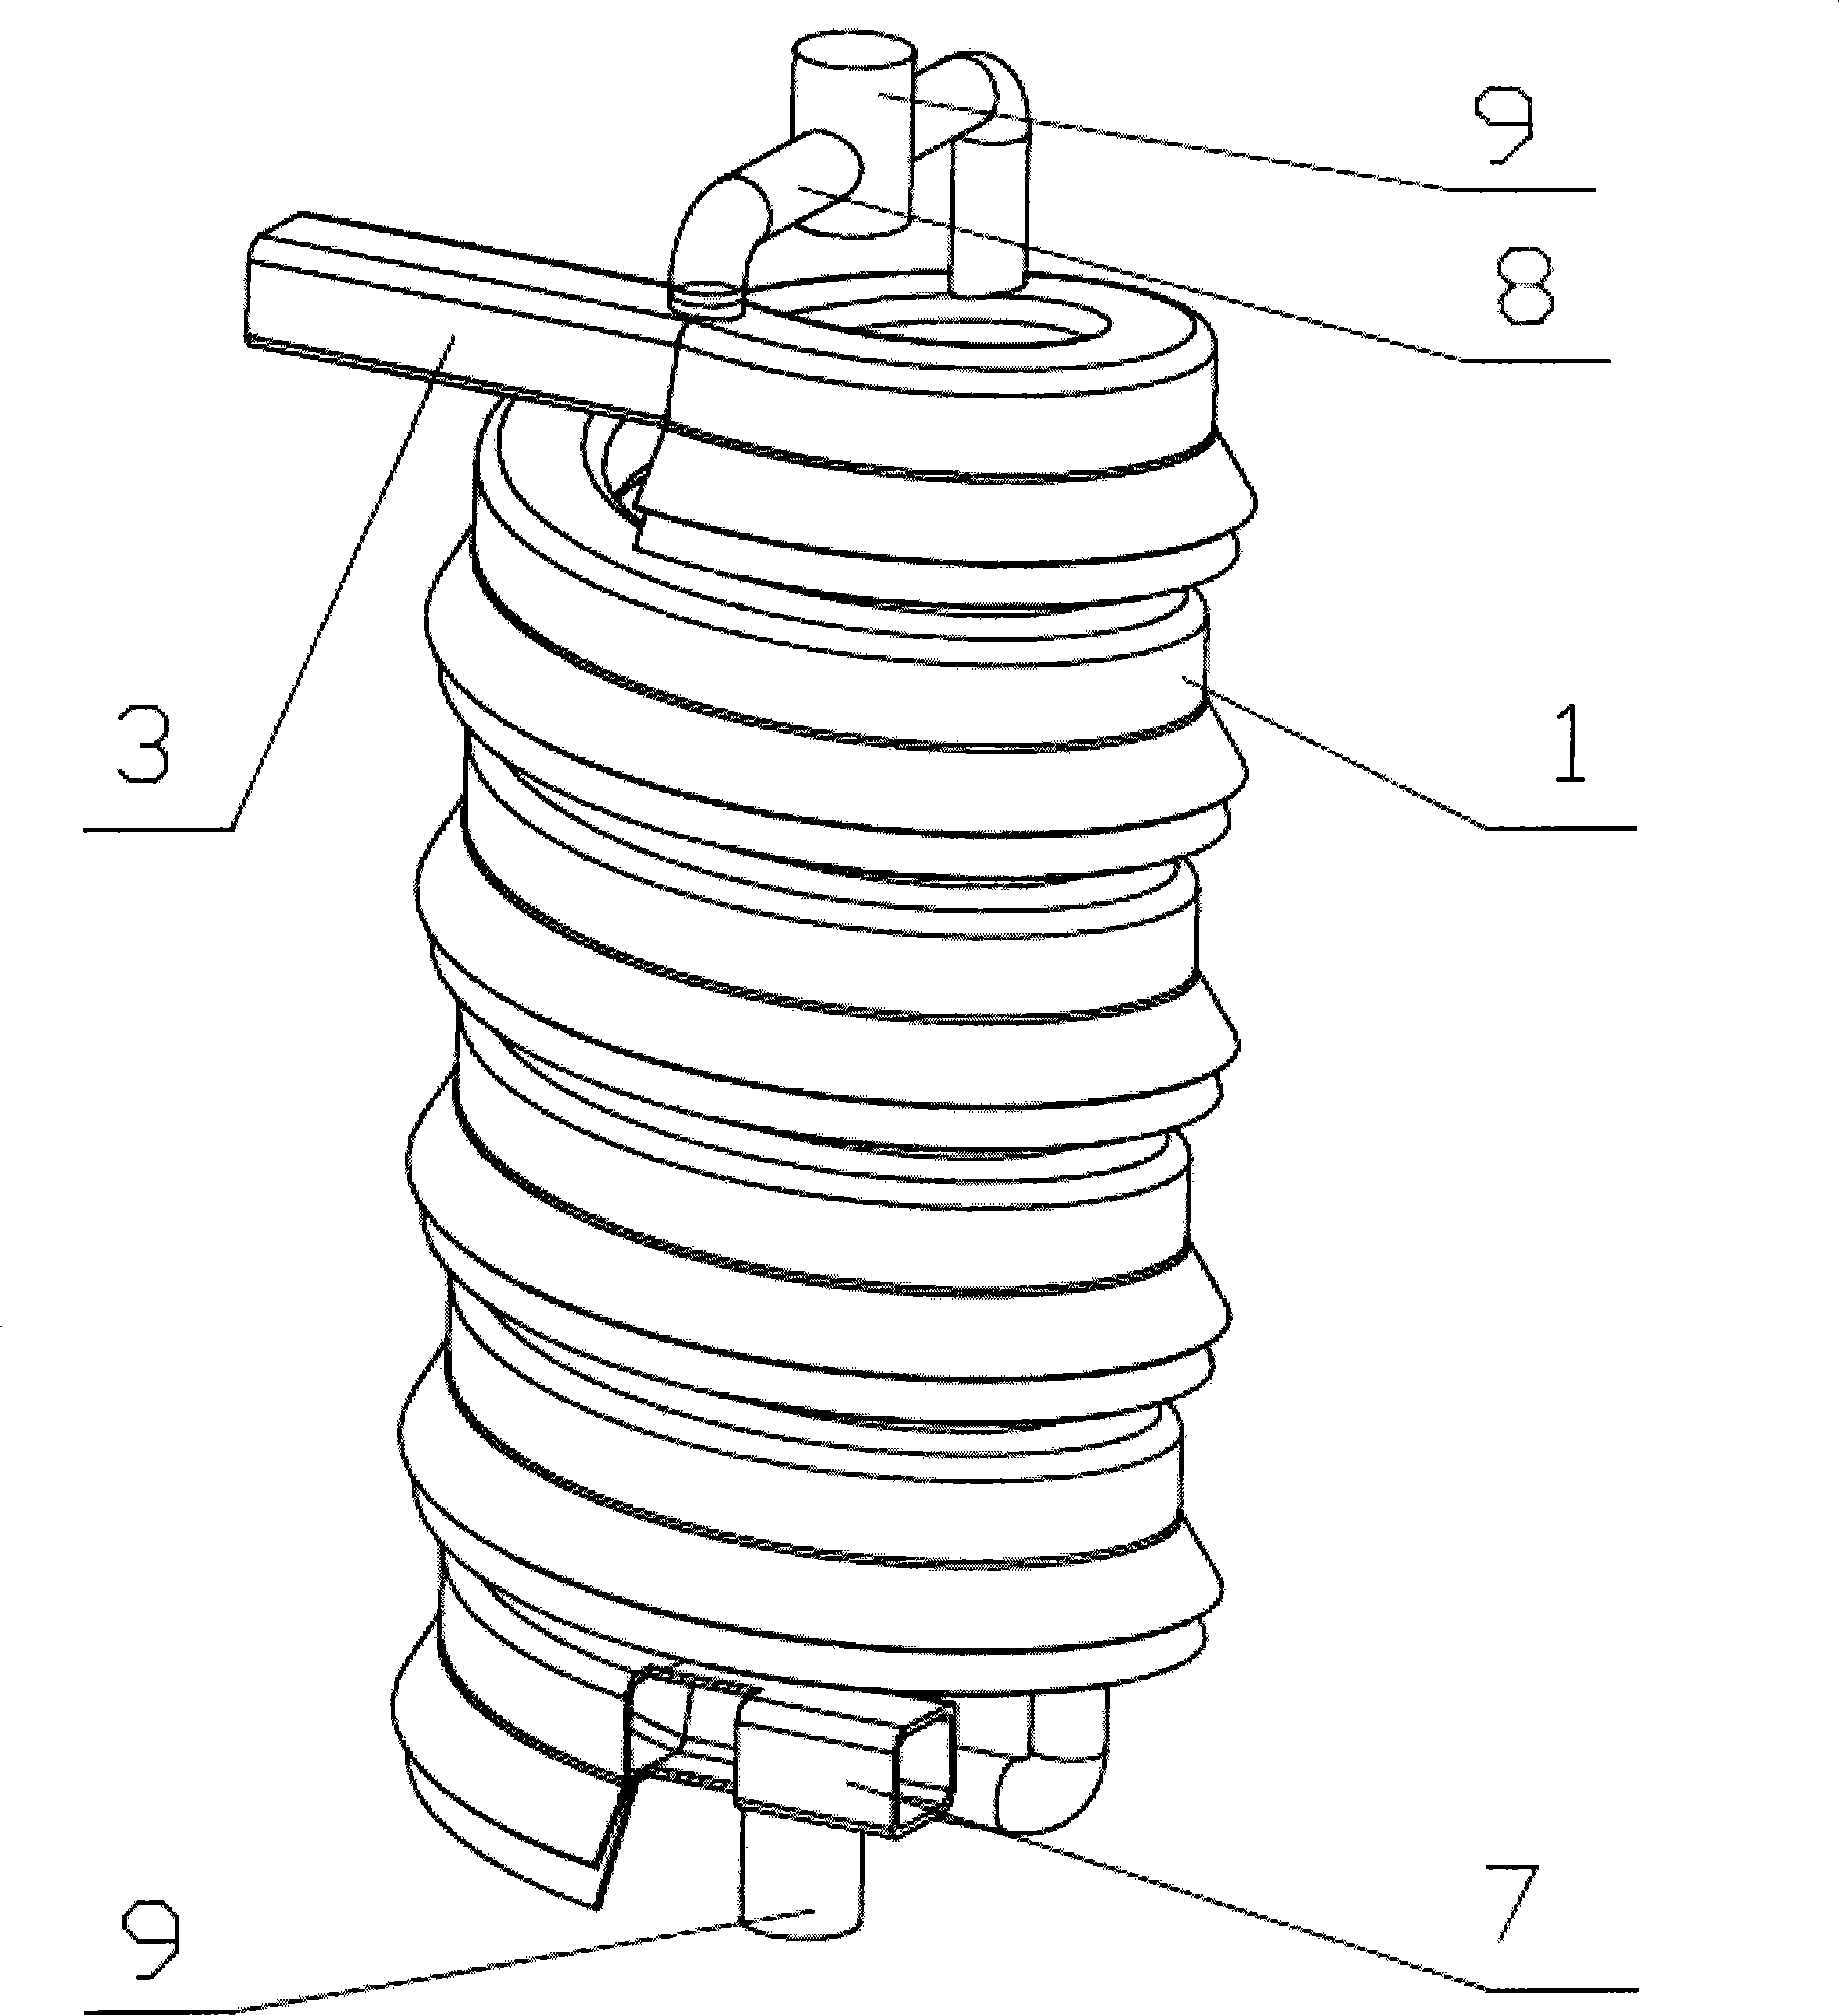 Spiral type gas-solid separation device